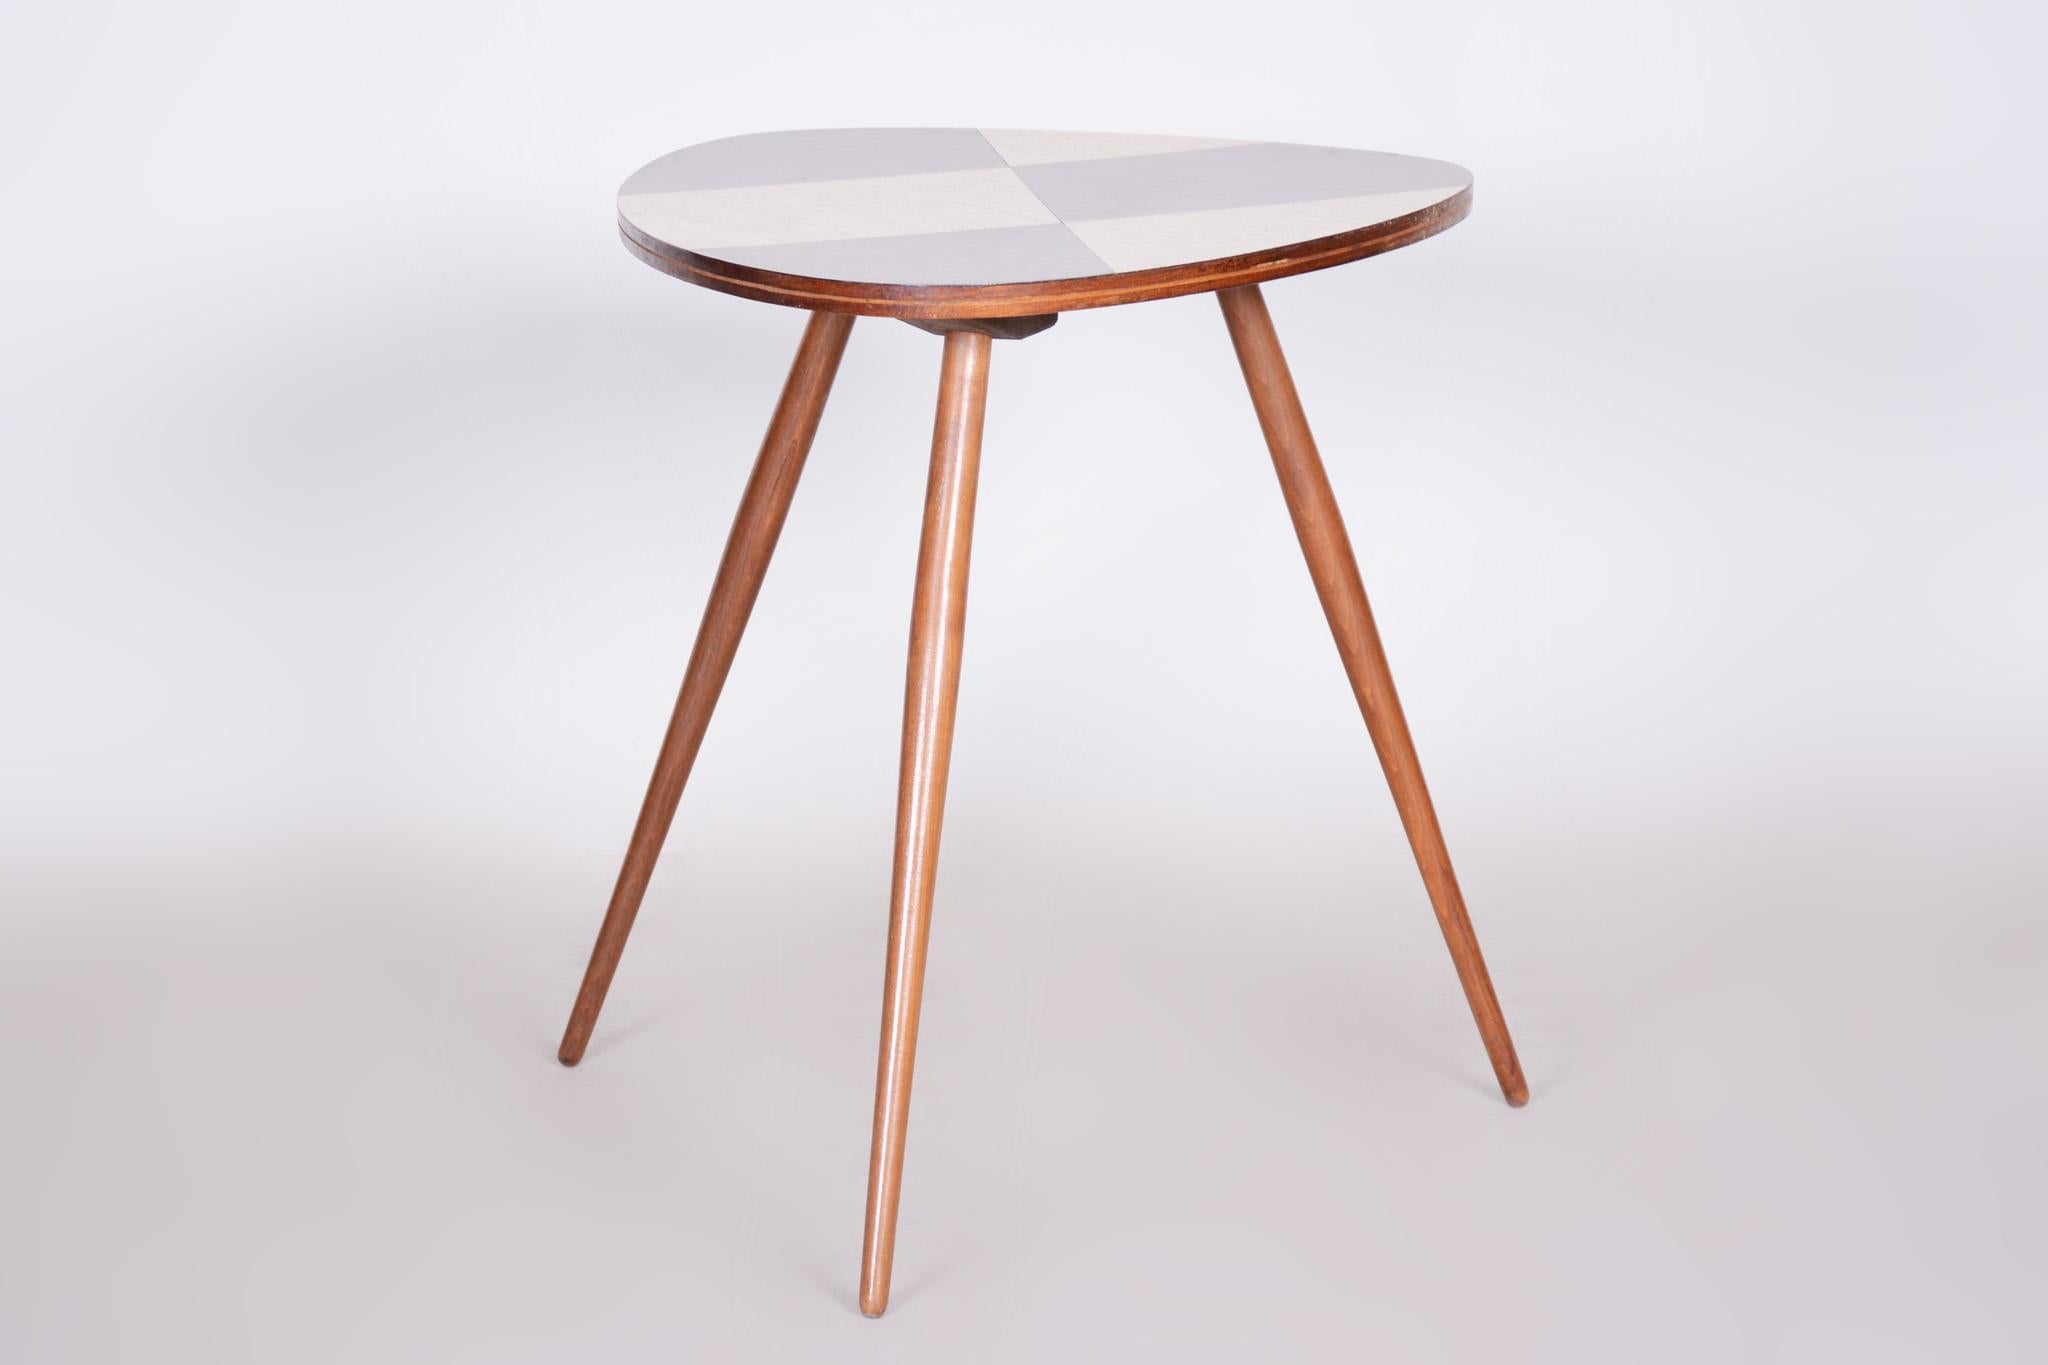 Mid-20th Century Small Mid Century Table, Made in Czechia, 1950s, Original Condition. Beech For Sale